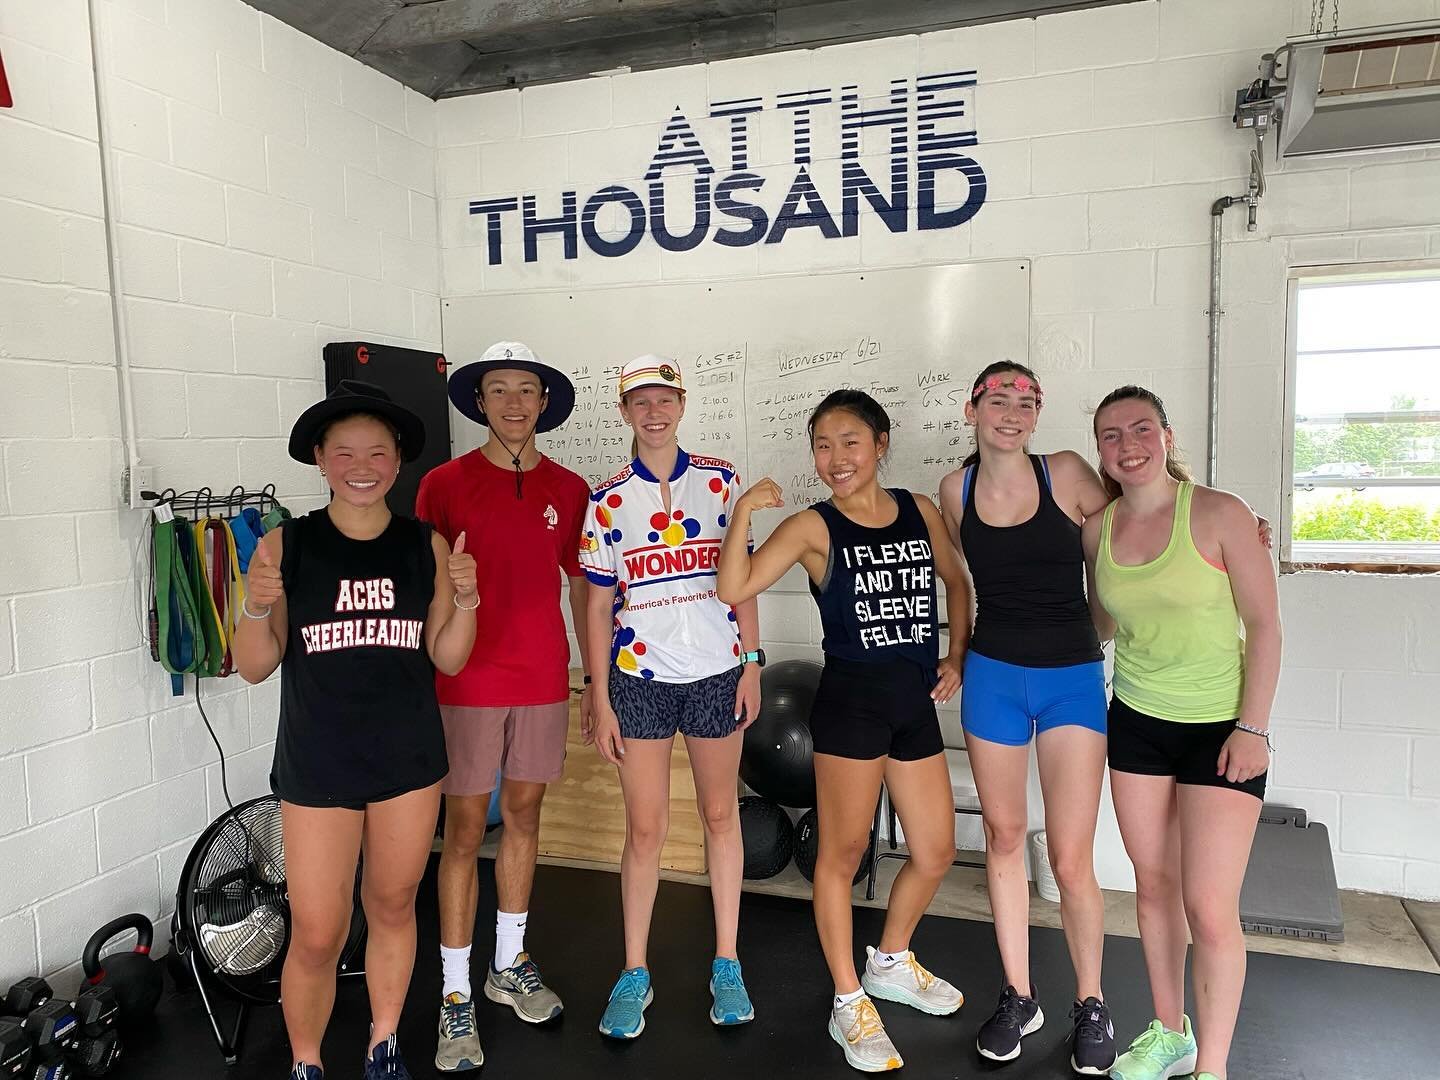 BEAUTIFUL DAYS IN PHILLY GOT US THINKING ABOUT SUMMER!

Massive shoutout to the ATT Team as they move through the spring season! Keep up that hard work! More speed to come. 

If you are a Greater Philadelphia area athlete and are interested in joinin